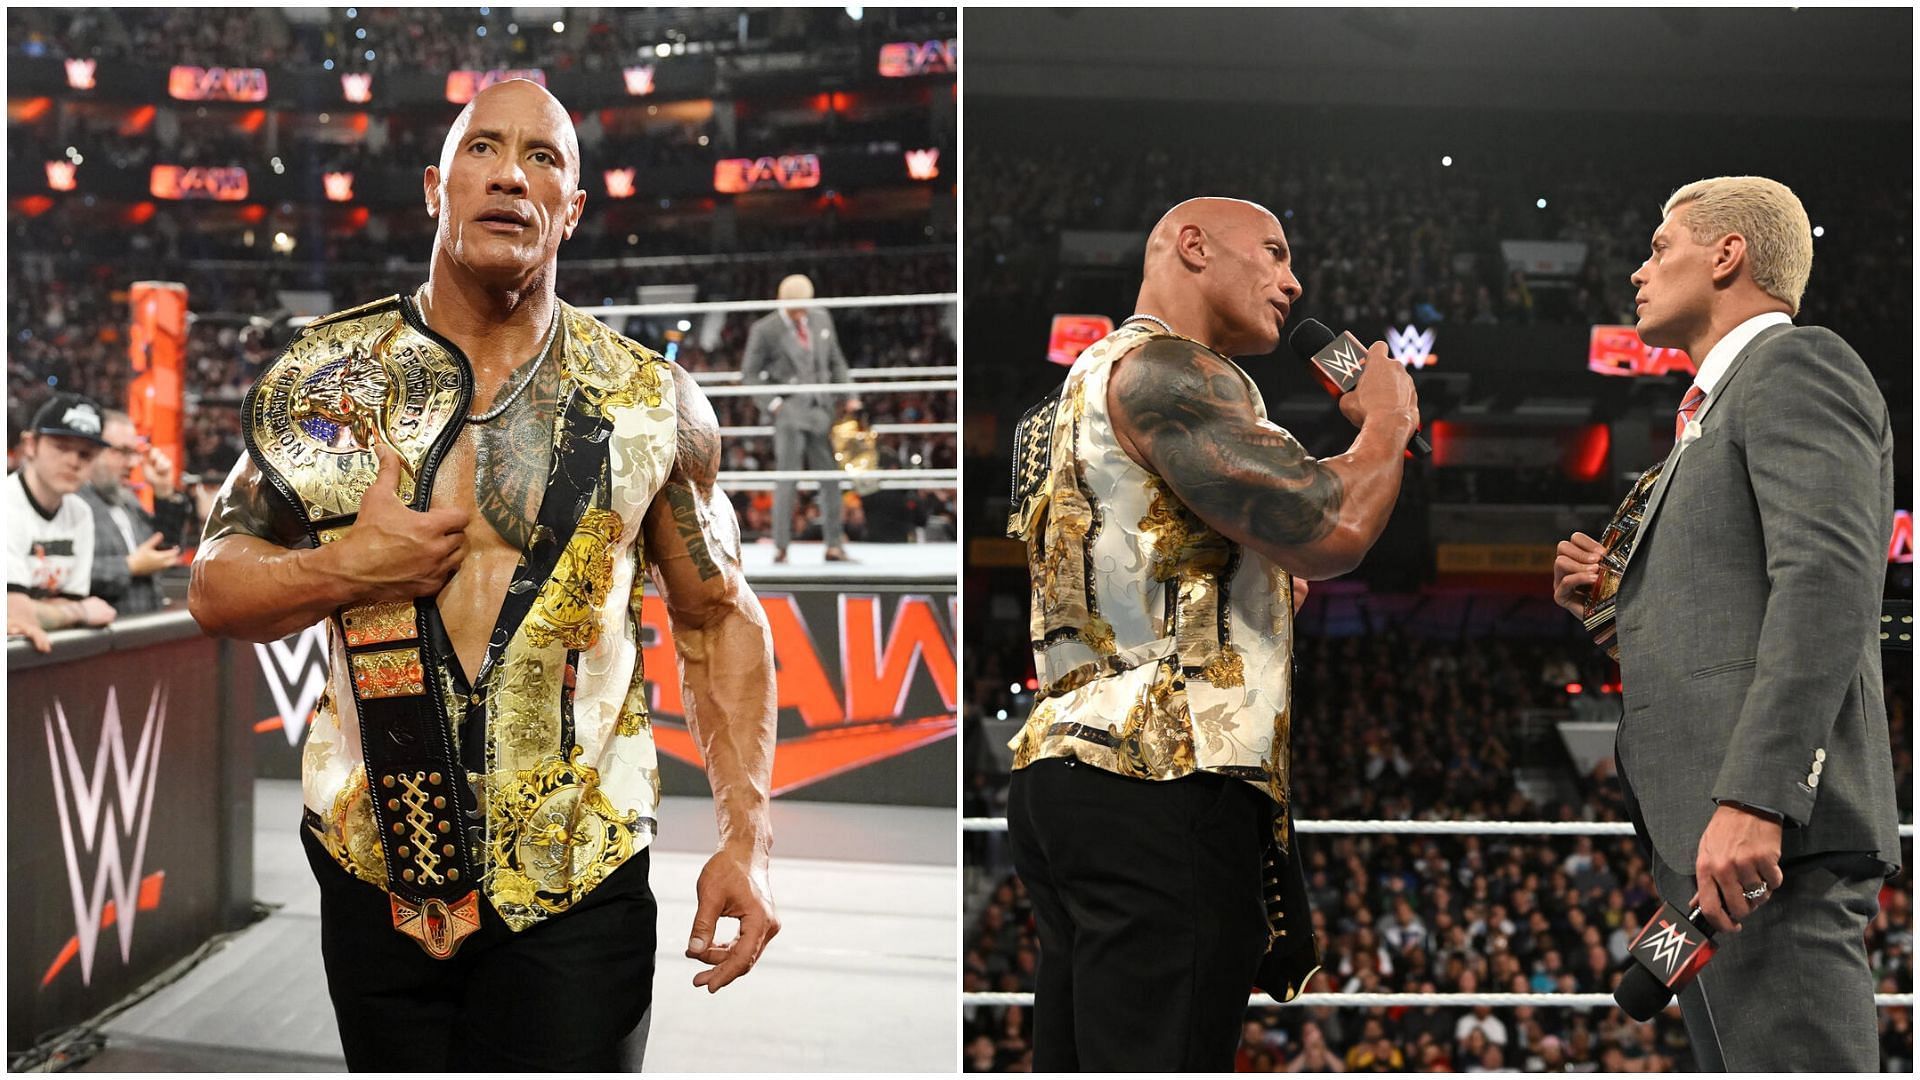 The Rock confronted Cody Rhodes on WWE RAW after WrestleMania.